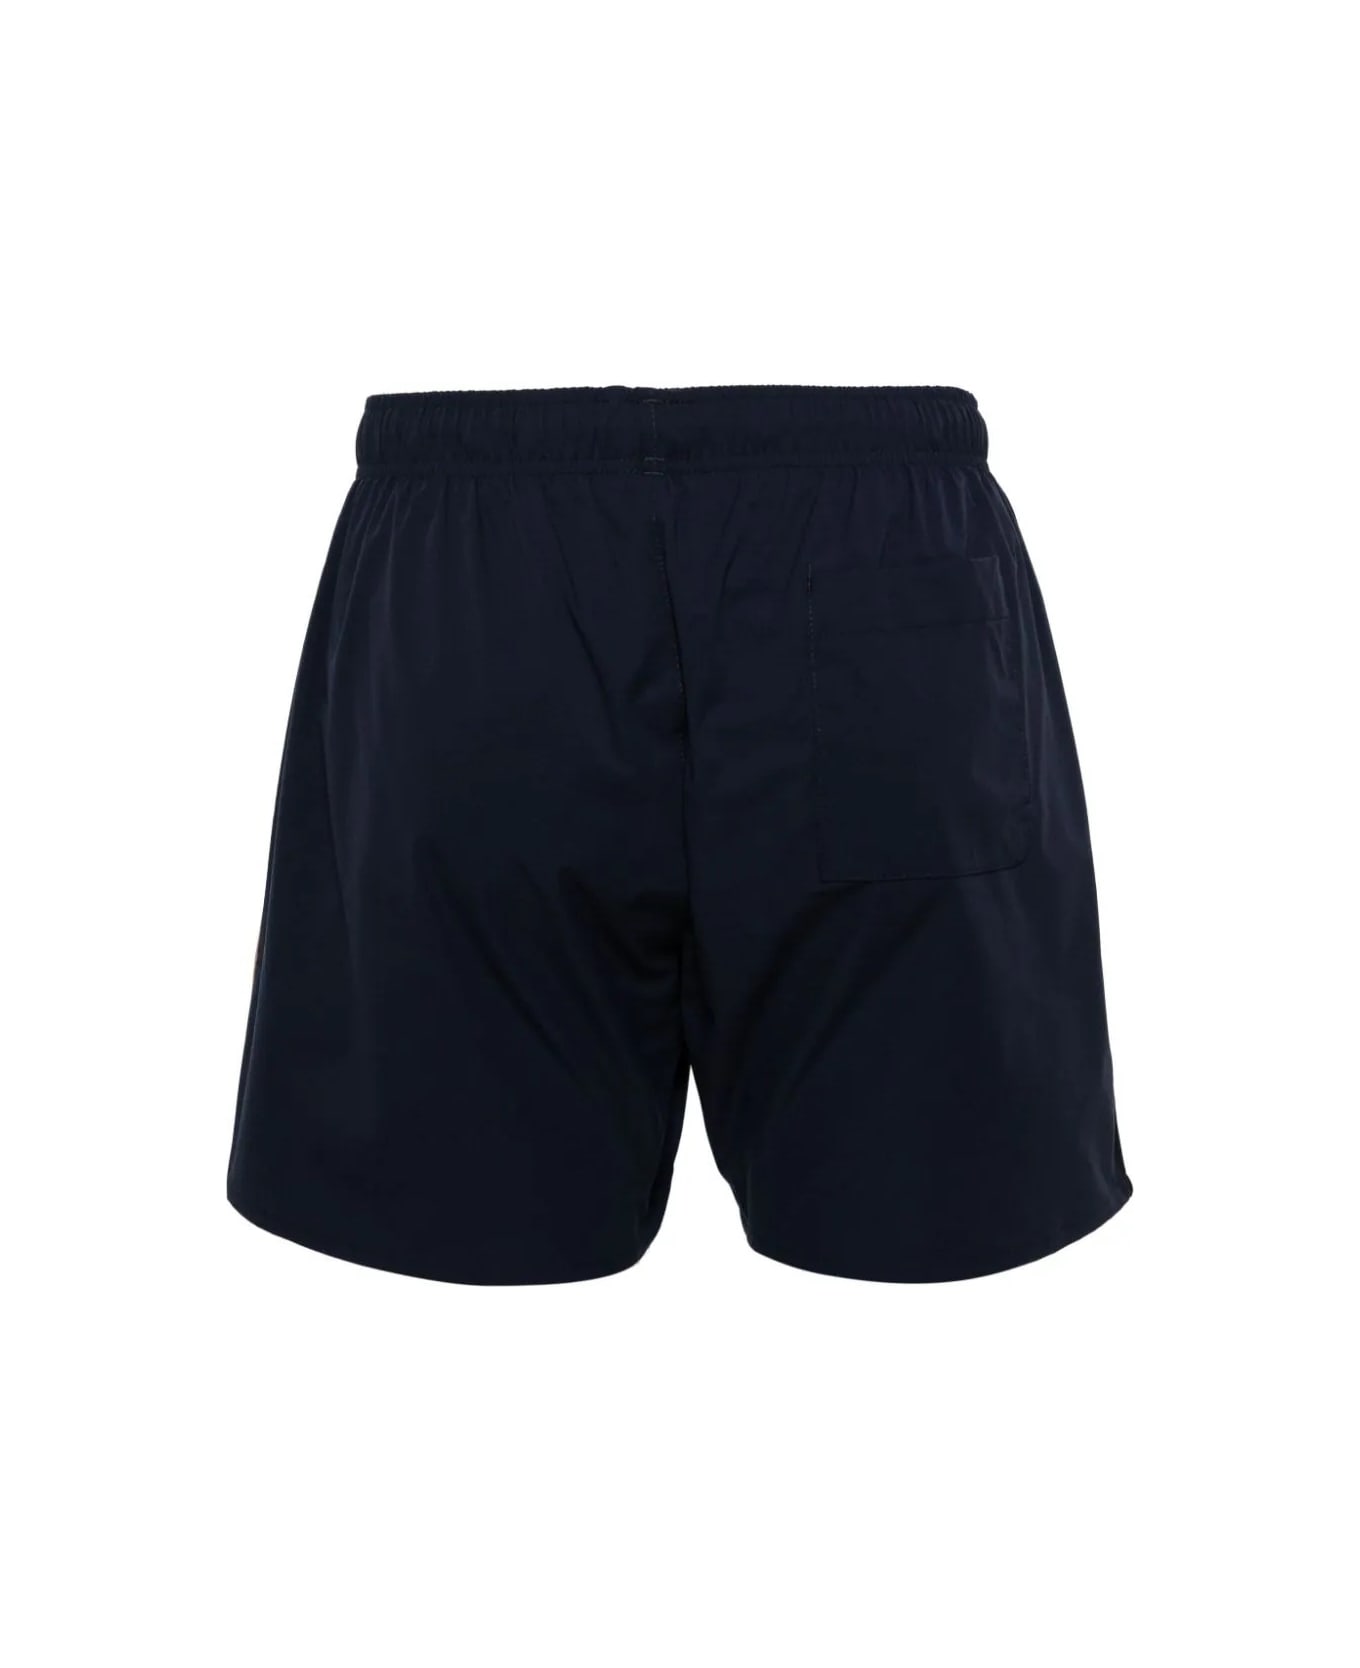 Hugo Boss Black Beach Boxers With Typical Brand Stripes And Logo - Black スイムトランクス